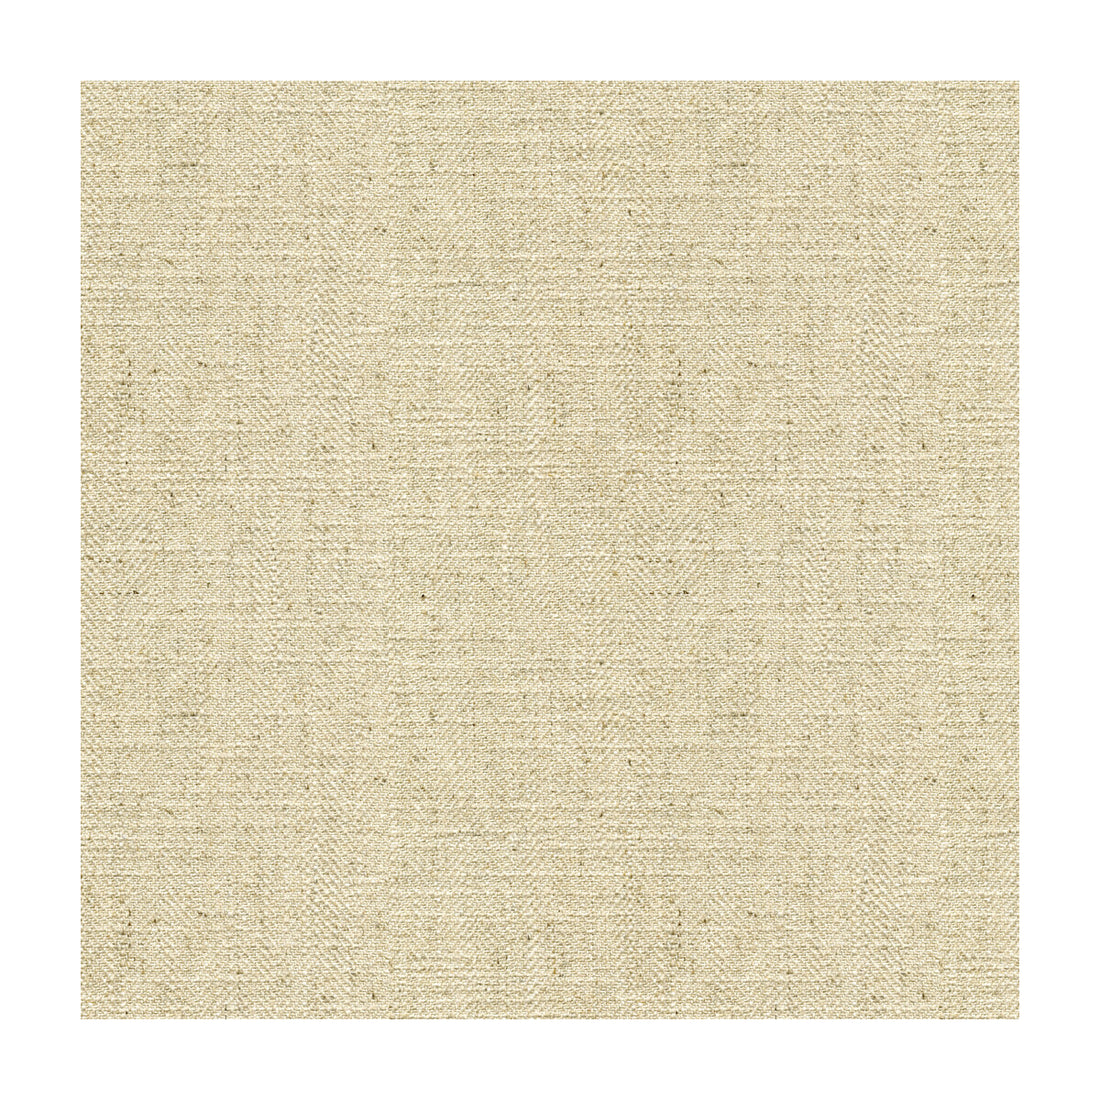 Kravet Basics fabric in 33842-2111 color - pattern 33842.2111.0 - by Kravet Basics in the Perfect Plains collection